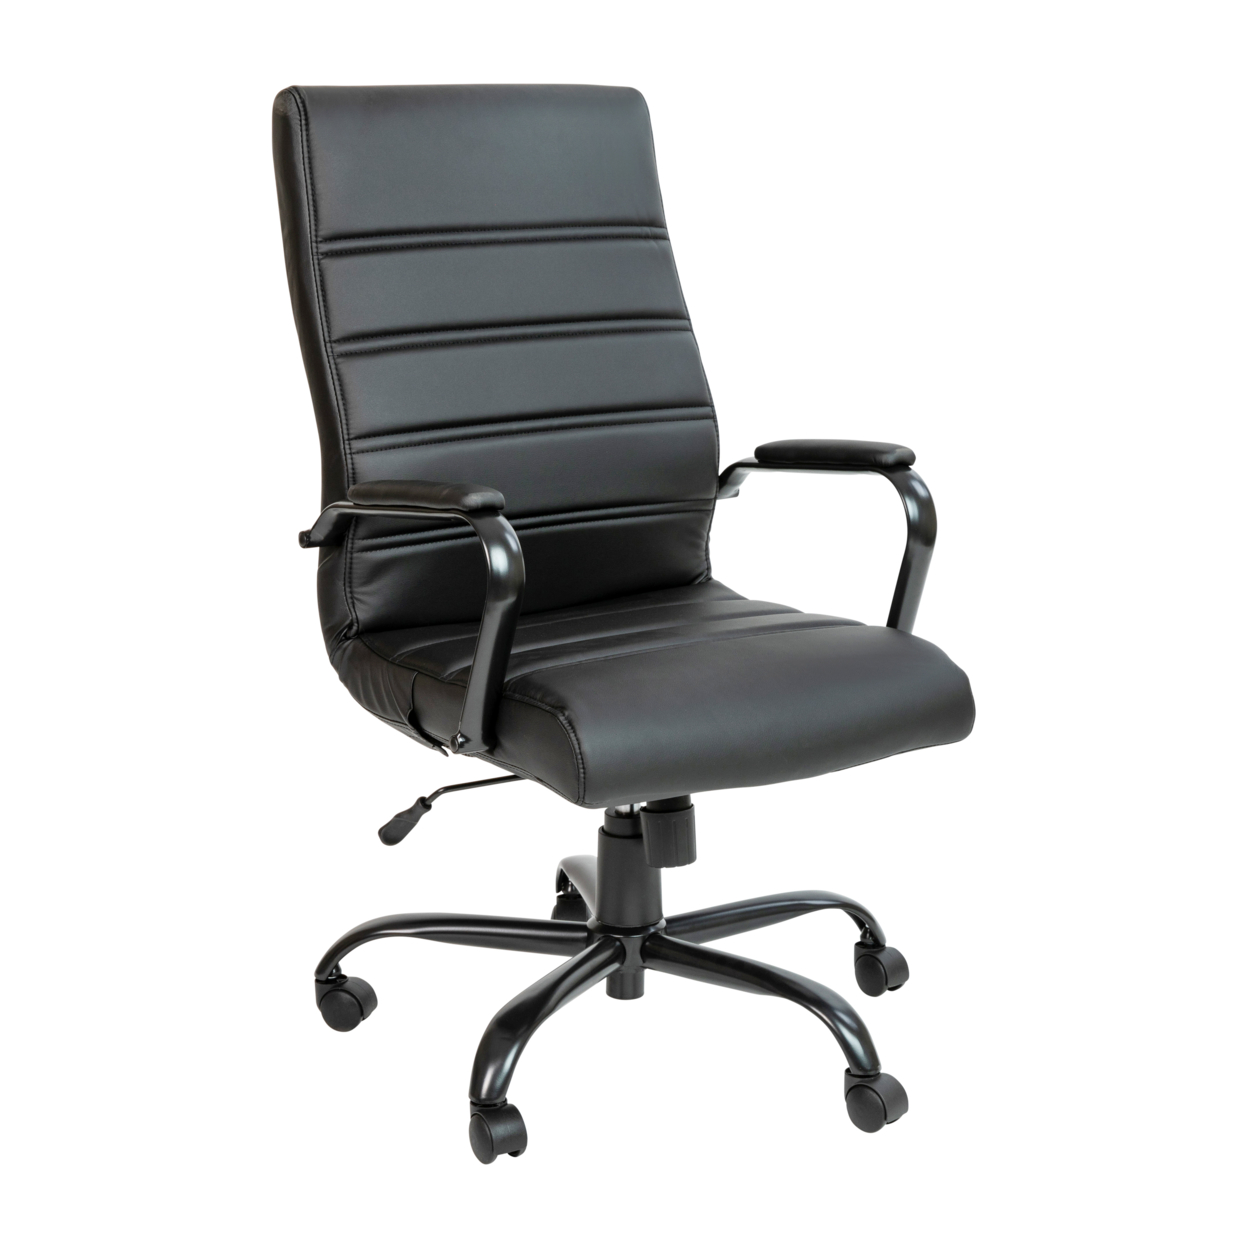 High Back Black LeatherSoft Executive Swivel Office Chair With Black Frame And Arms